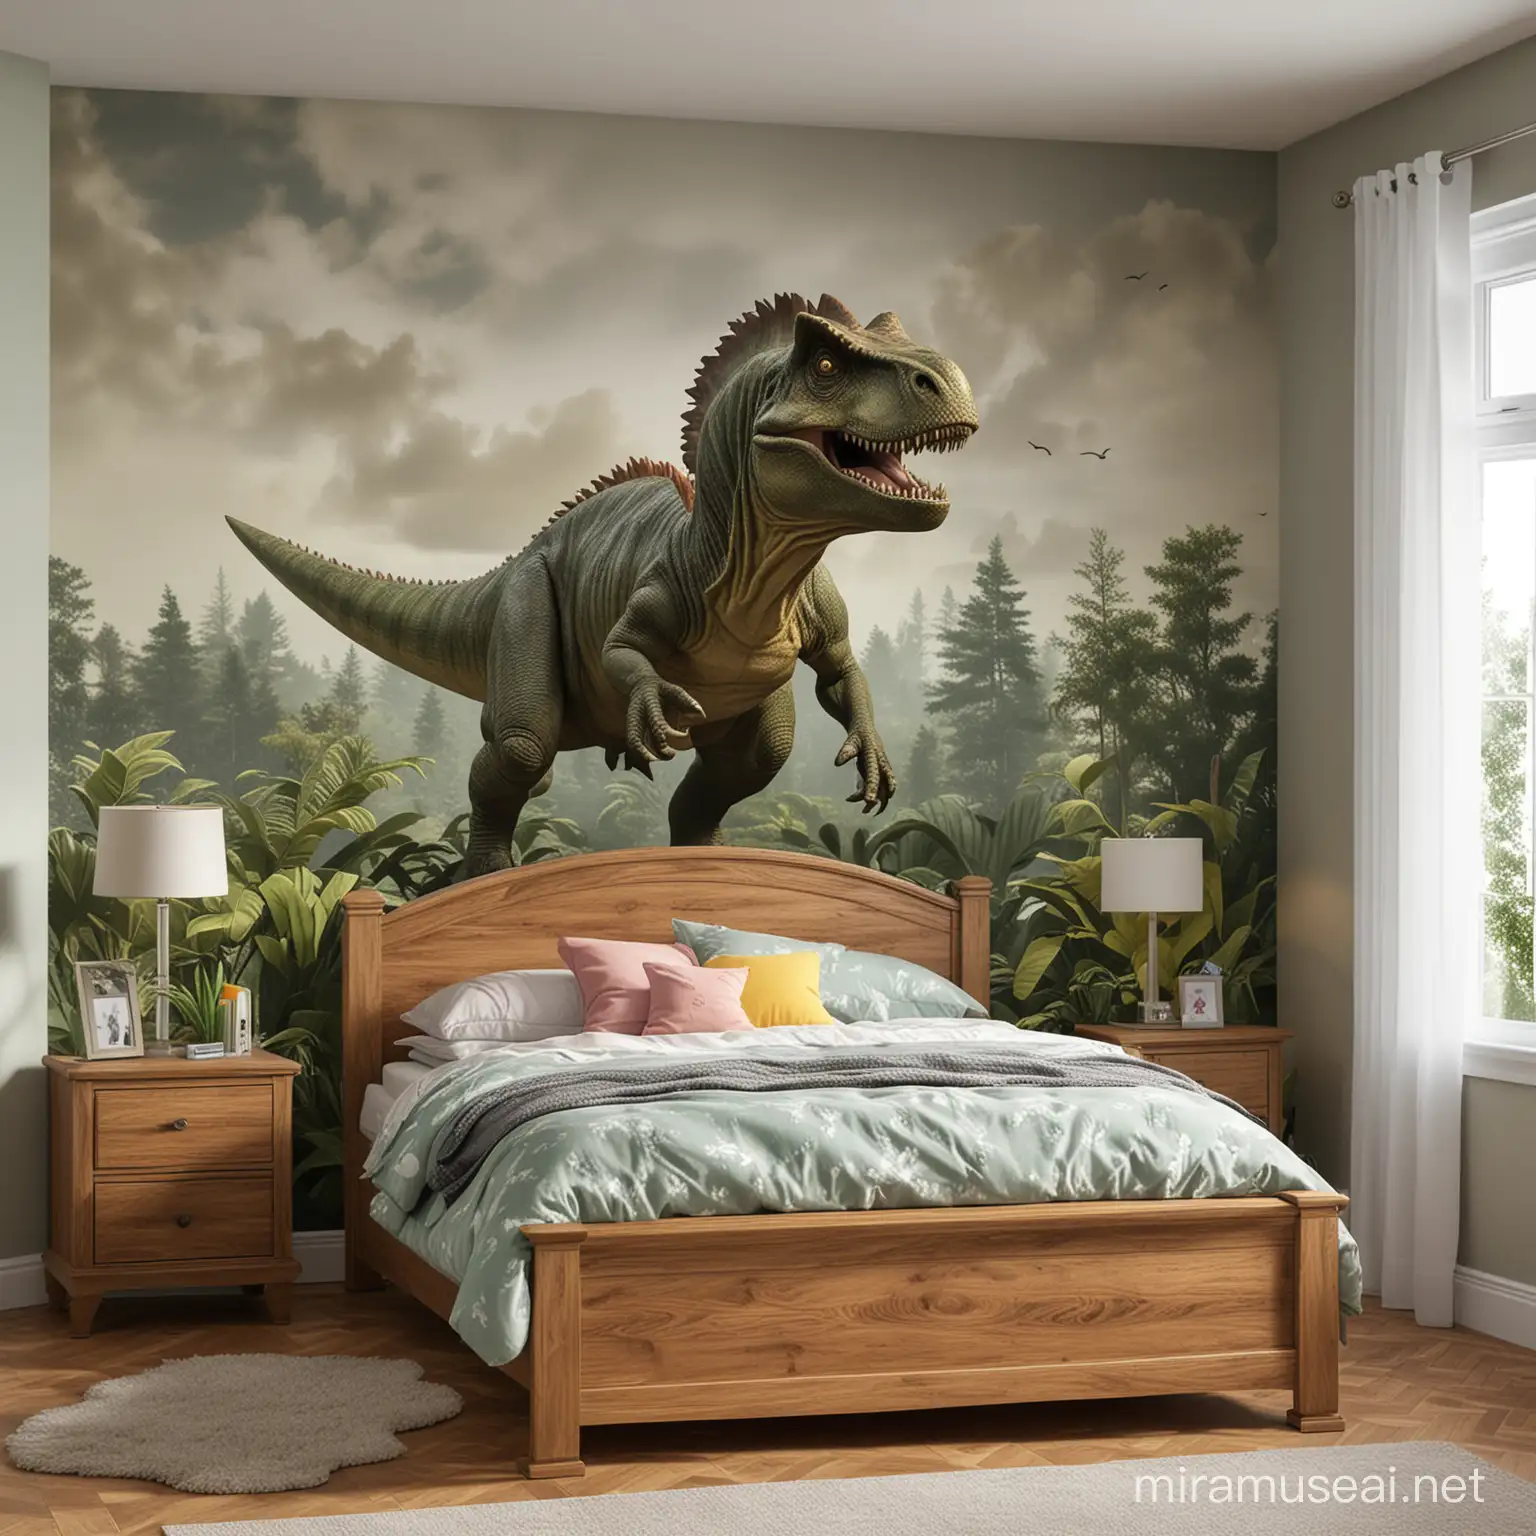 Childs DinosaurThemed Bedroom with Unique Dino Bed